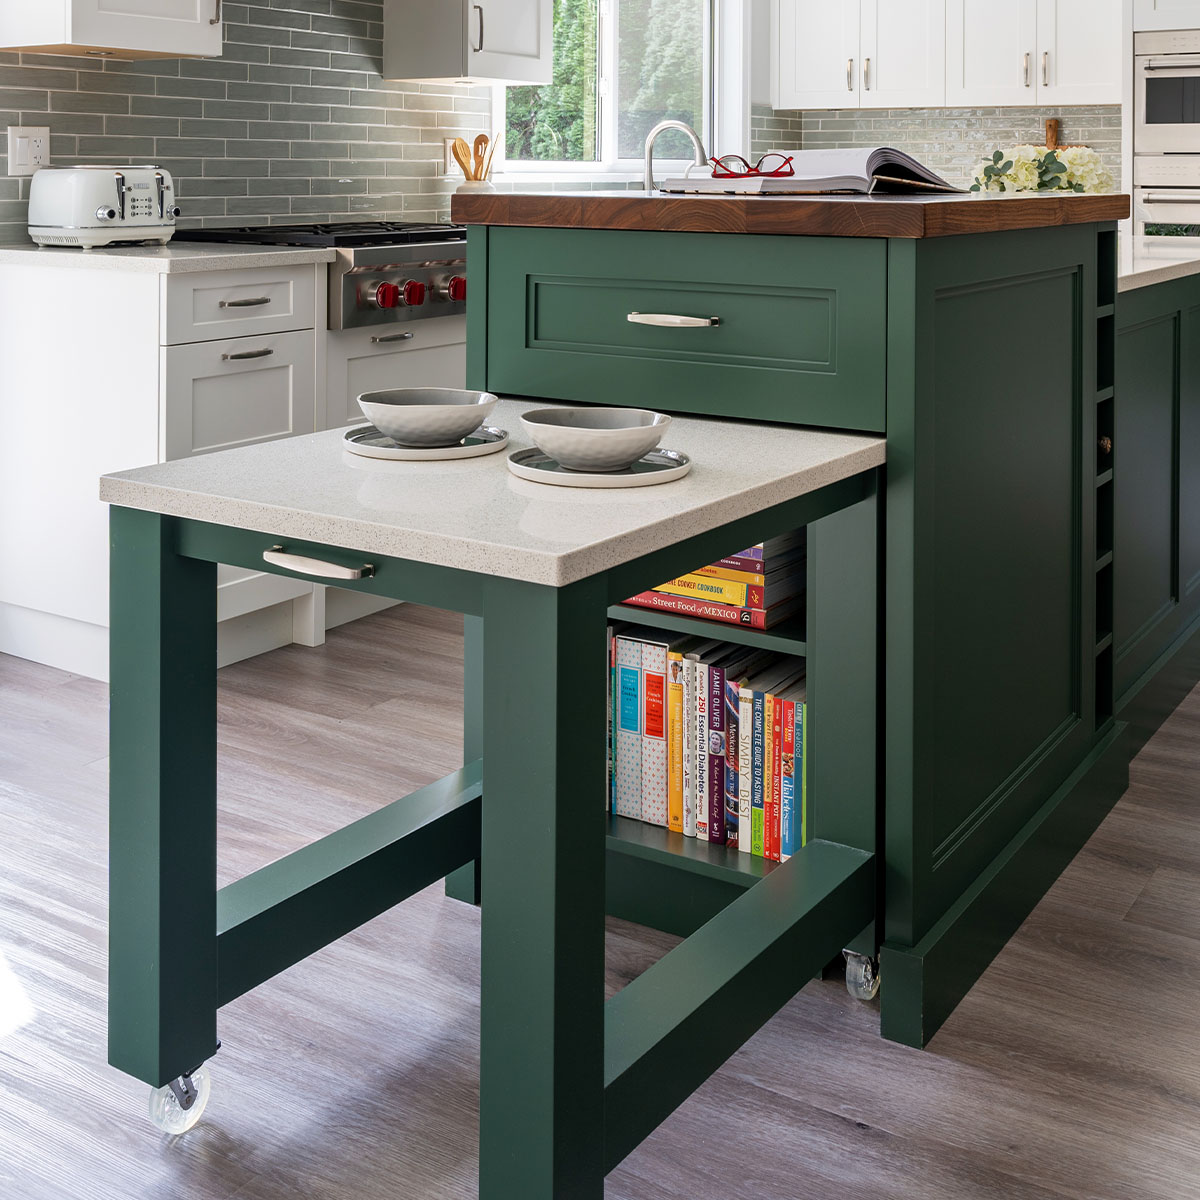 Stylish kitchen island featuring book shelf and coffee table